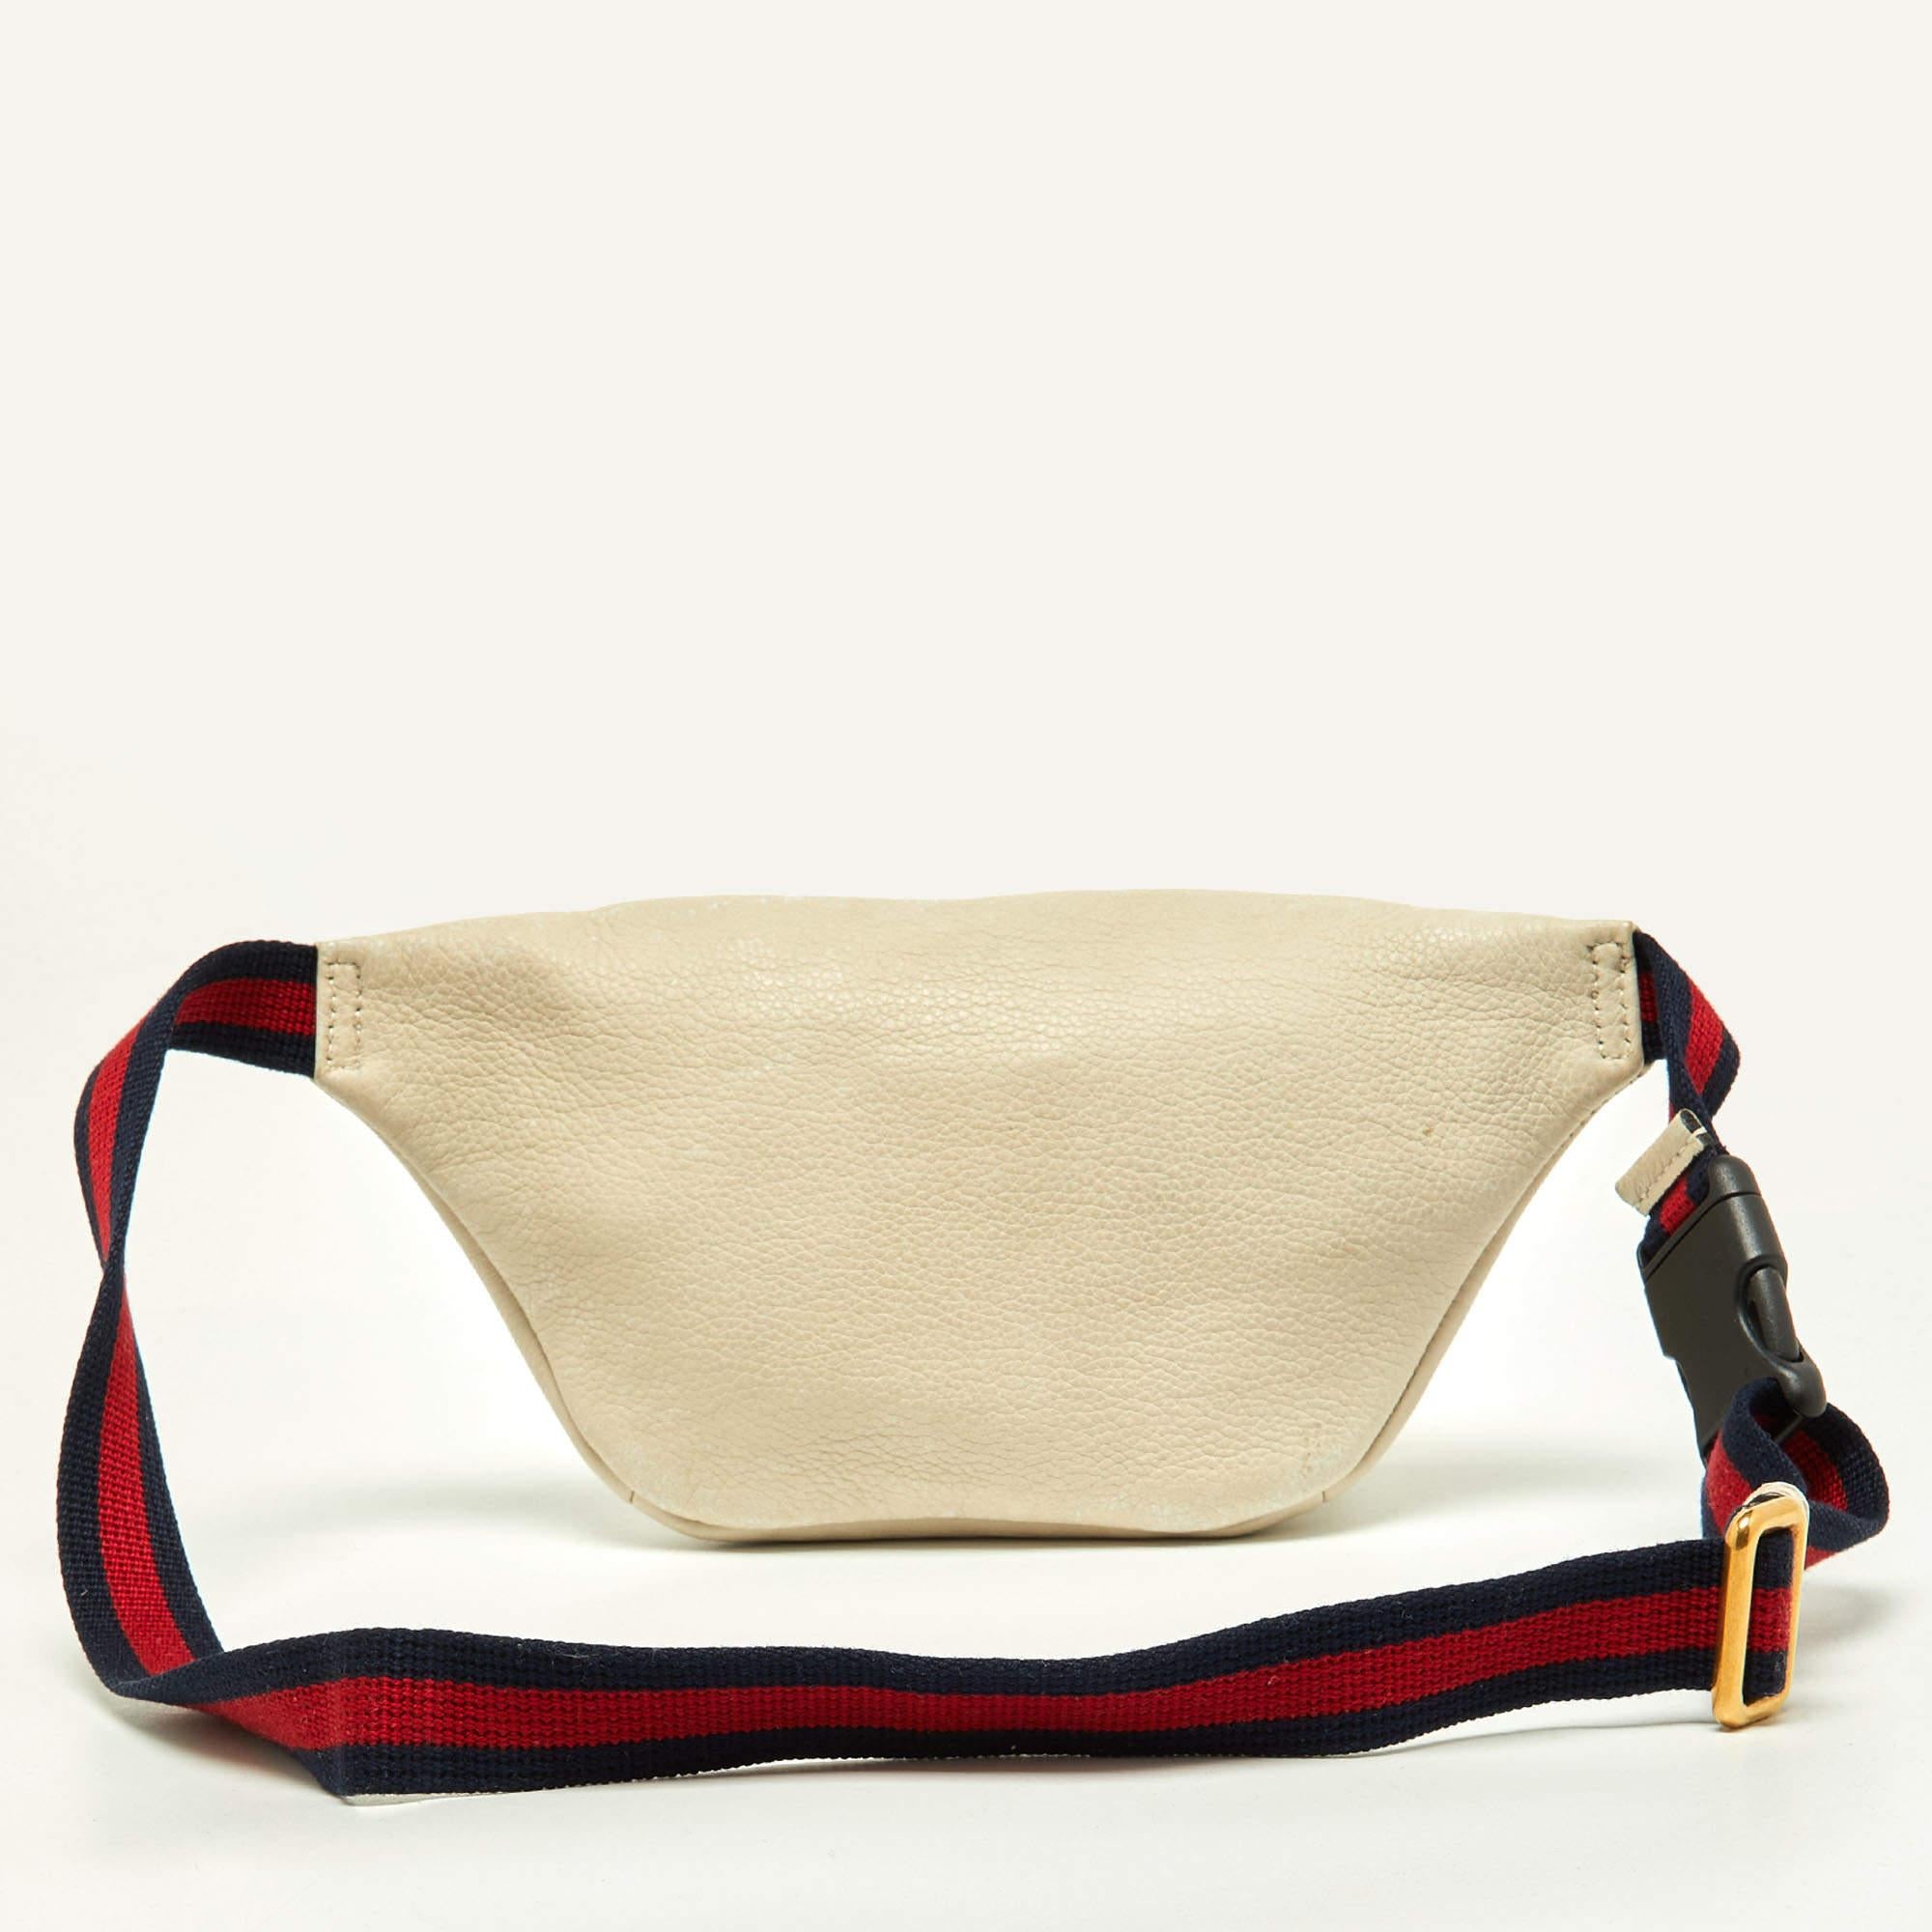 This uber-stylish Gucci waist belt bag aims to be an elevating piece. It is carefully created using cream leather and has the logo on the front. See how it transforms a T-shirt dress or a solid jumpsuit!

Includes: Info Booklet